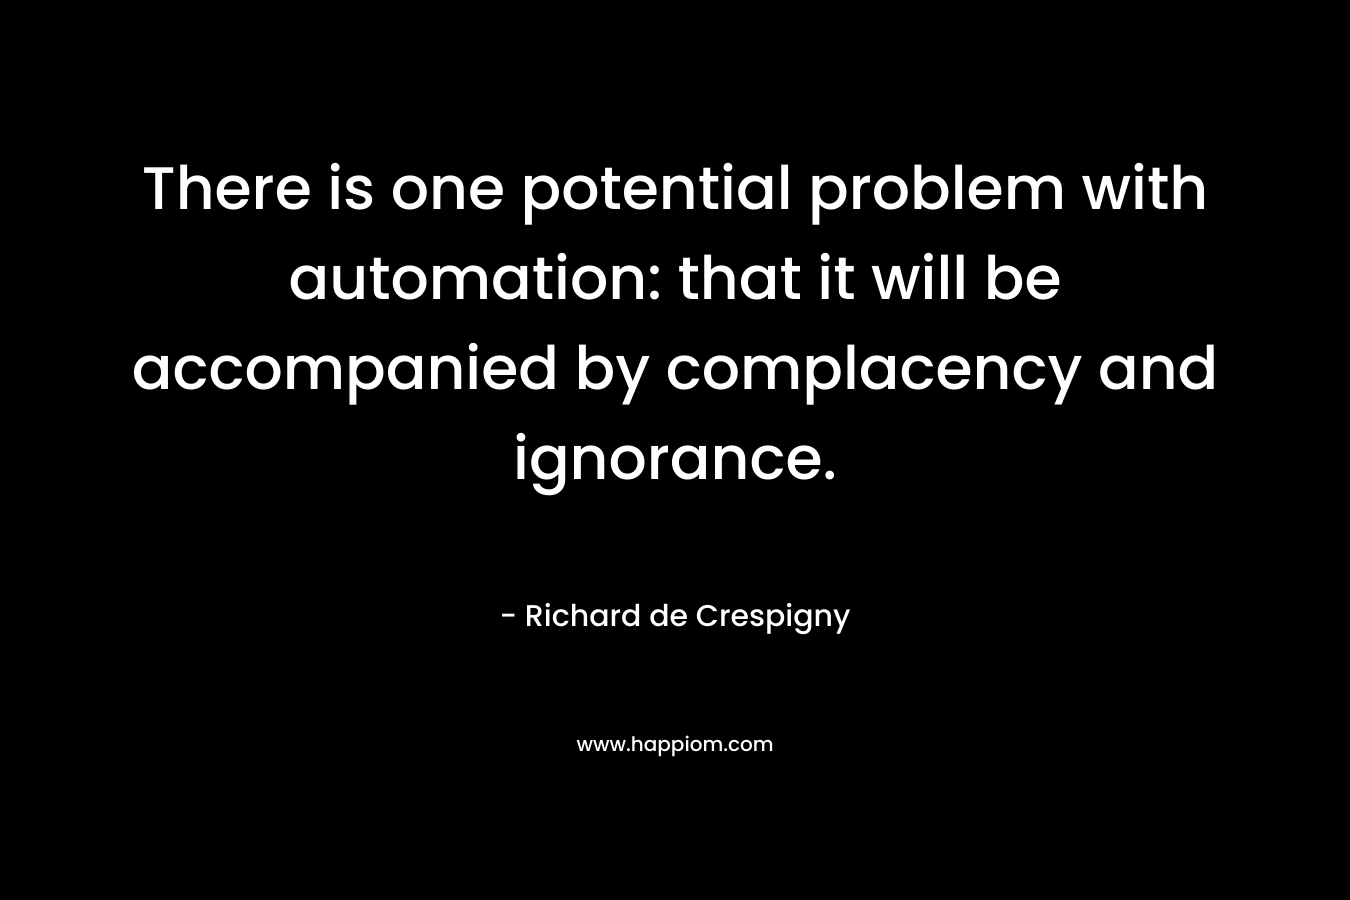 There is one potential problem with automation: that it will be accompanied by complacency and ignorance.